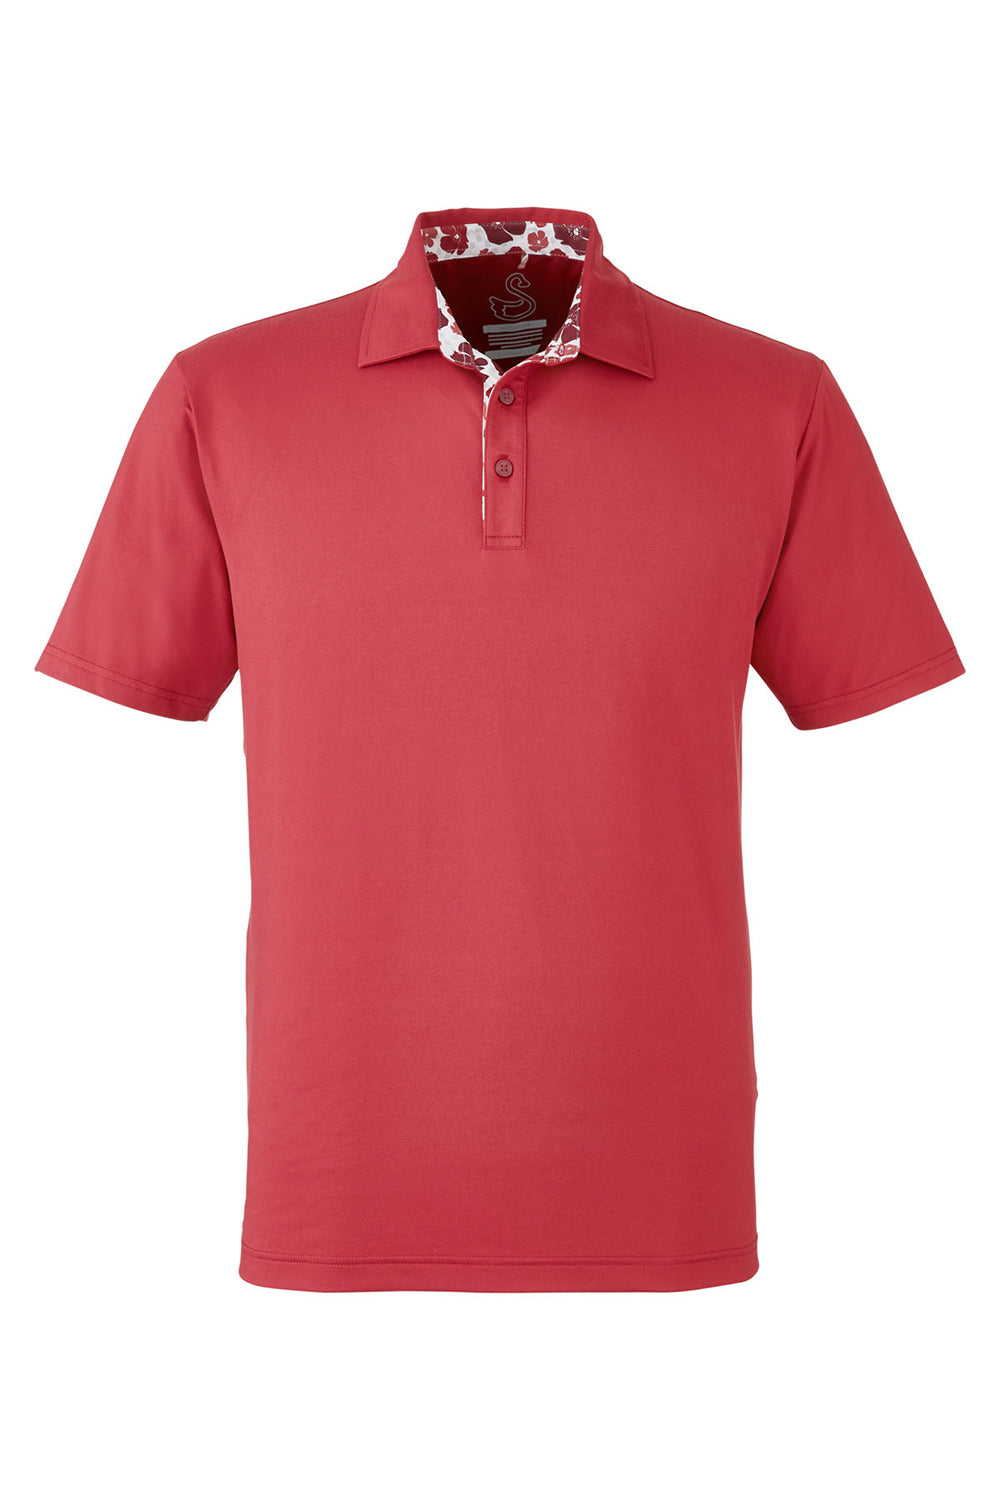 Swannies Golf SW2000 Mens James Short Sleeve Polo Shirt Heather Red Flat Front